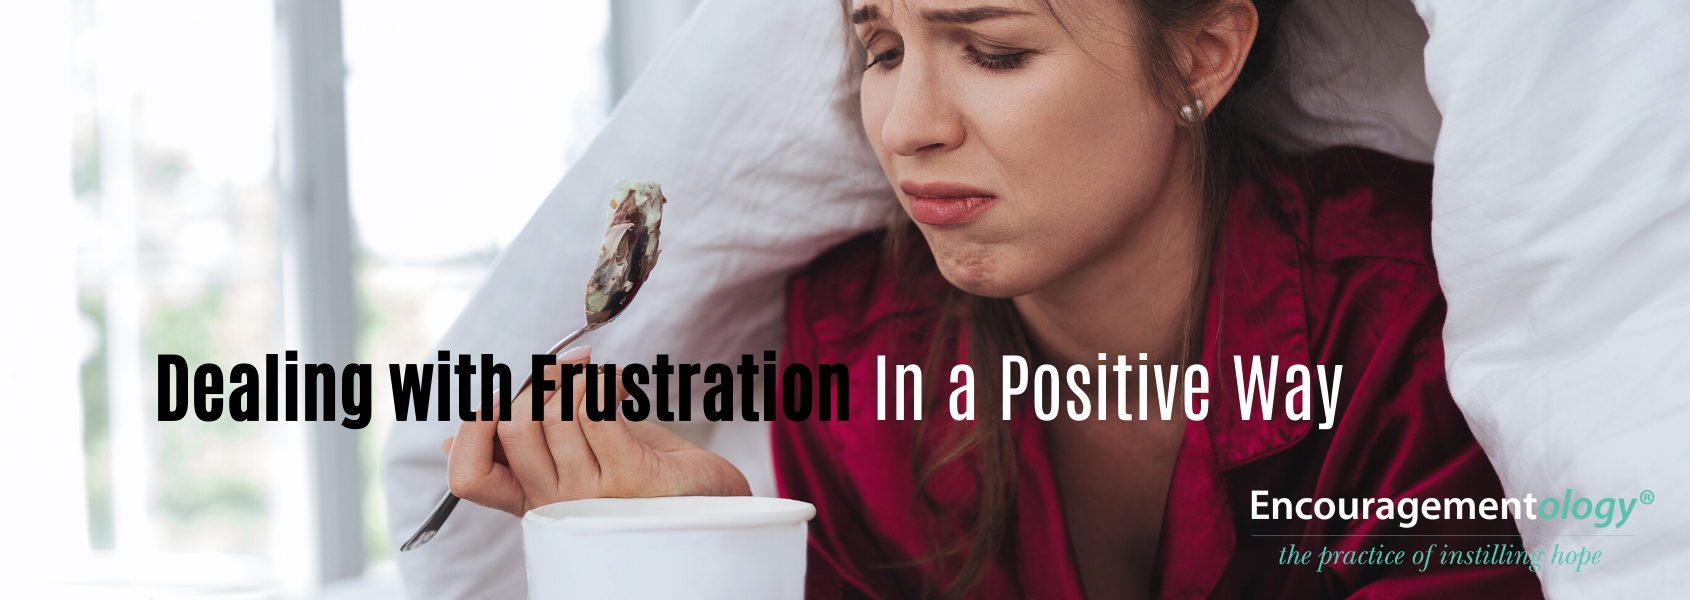 Dealing with Frustration in a Positive Way